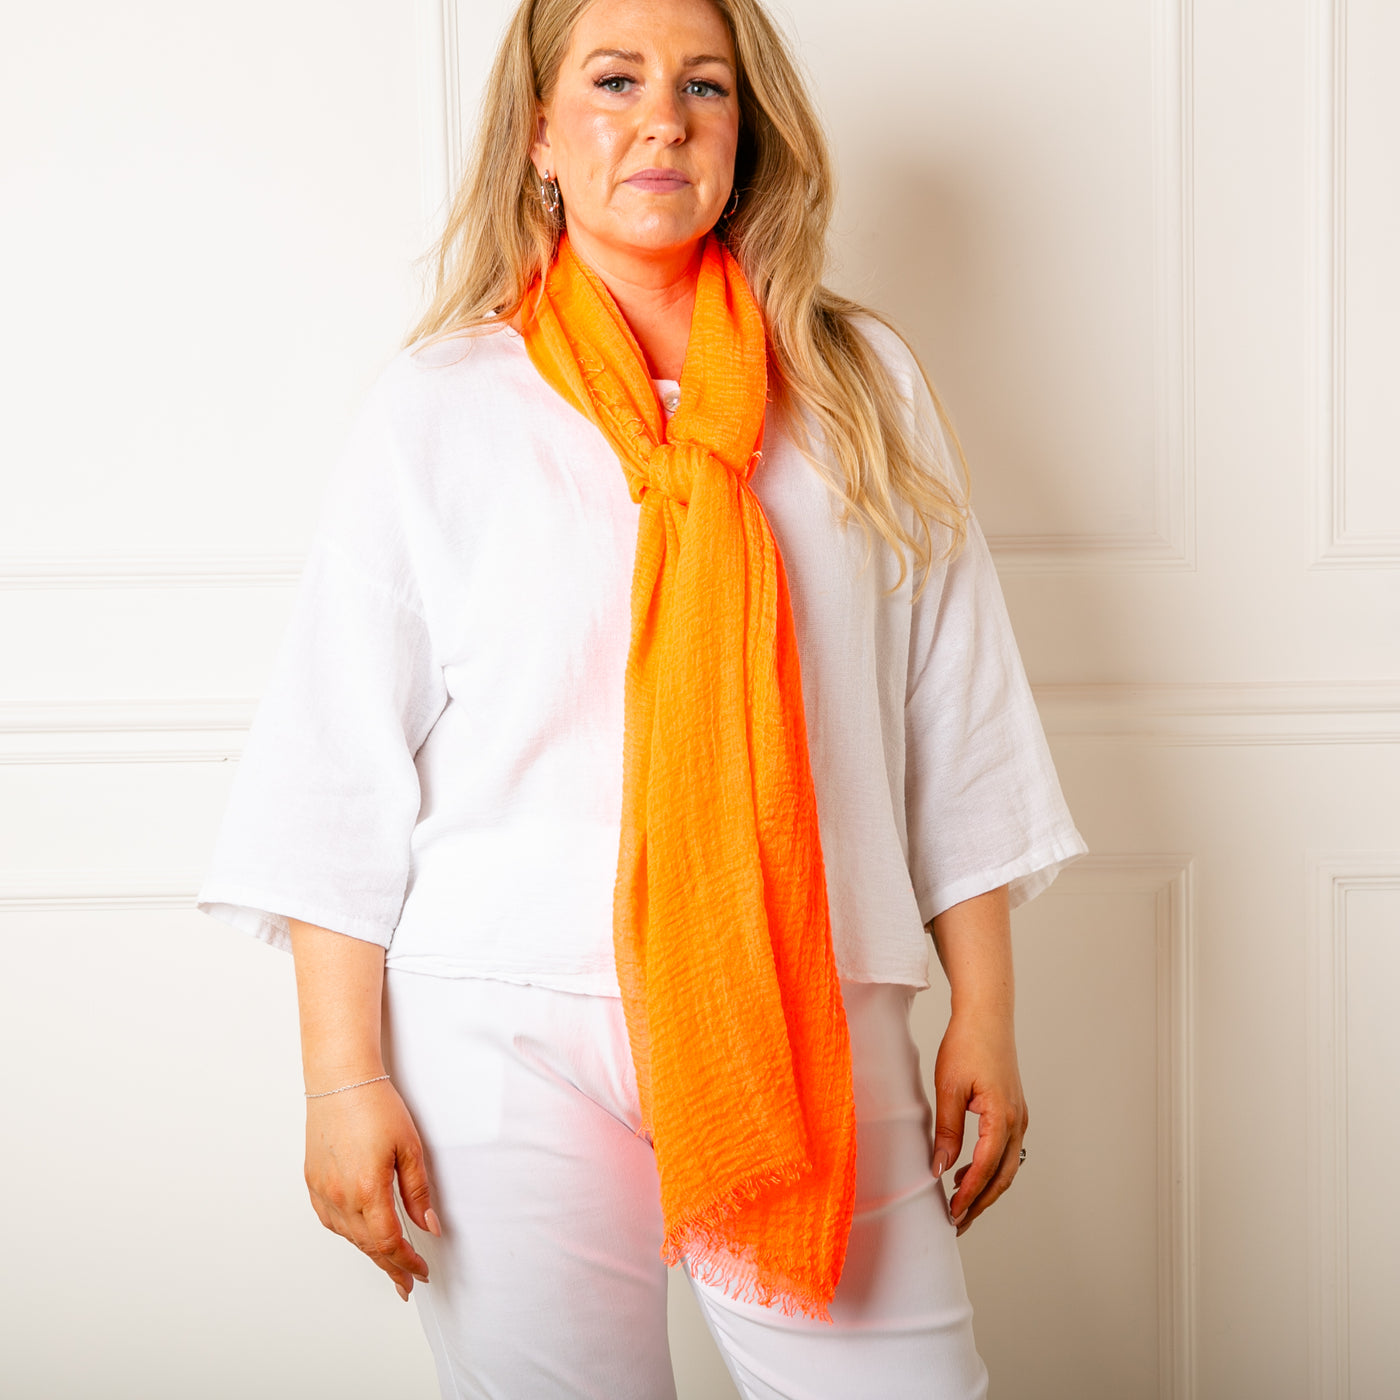 The coral orange Plain Summer Scarf made from a soft, lightweight viscose material